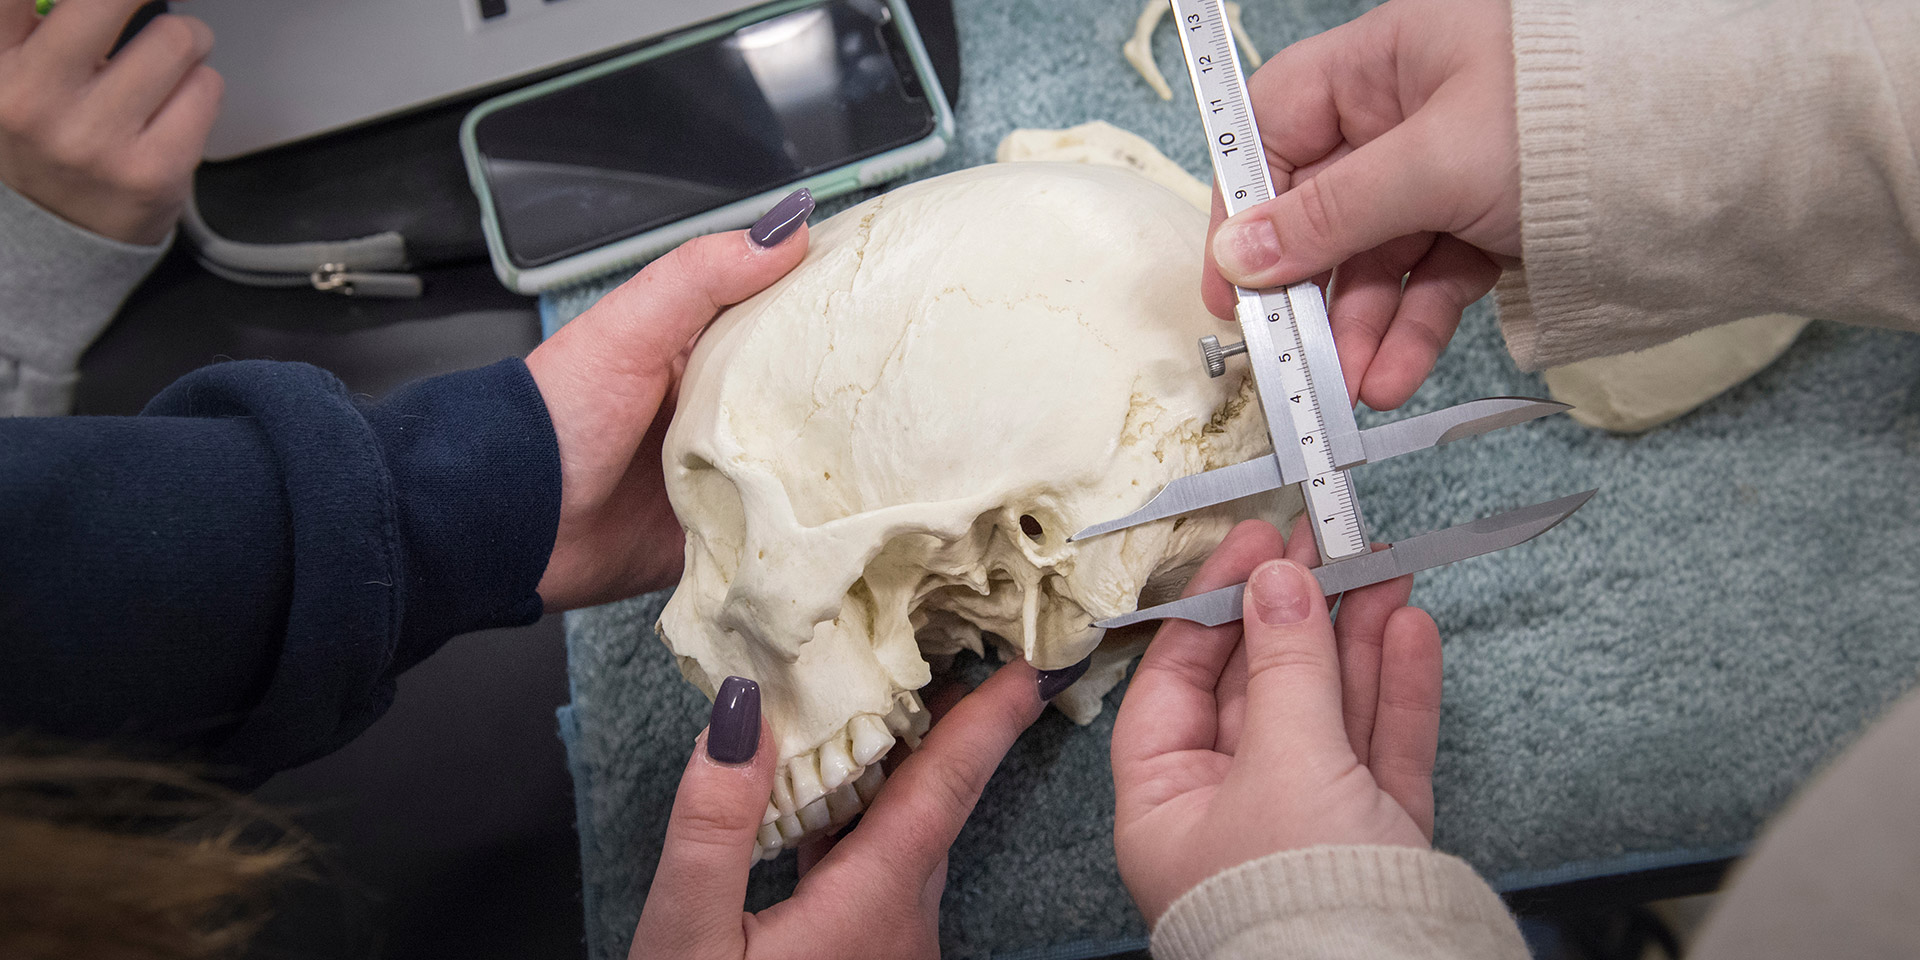 Students holding and measuring a human skull